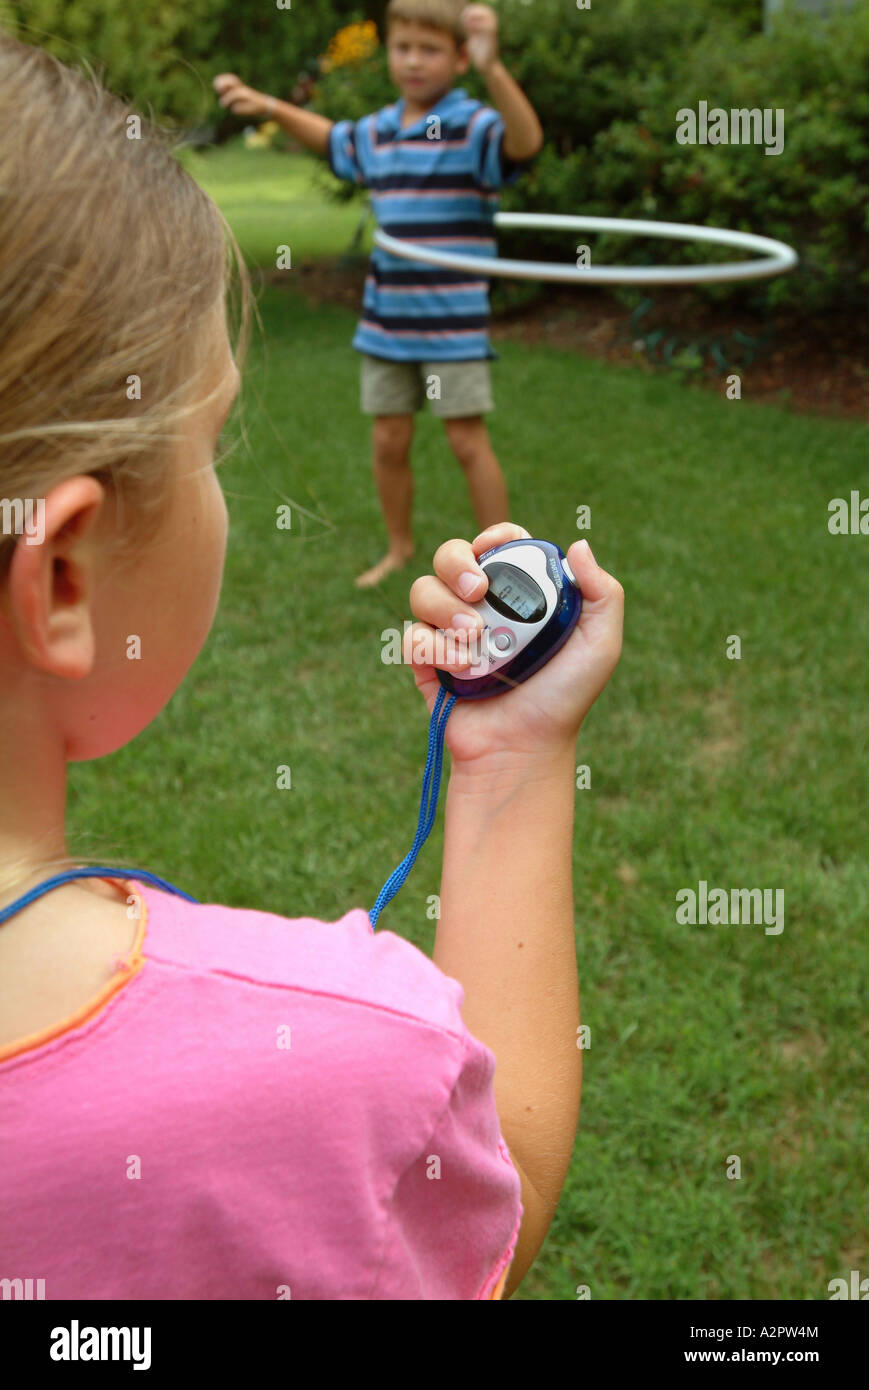 10 year old girl uses a digital stop watch to time her 7 year old brother doing using a hula hoop Stock Photo